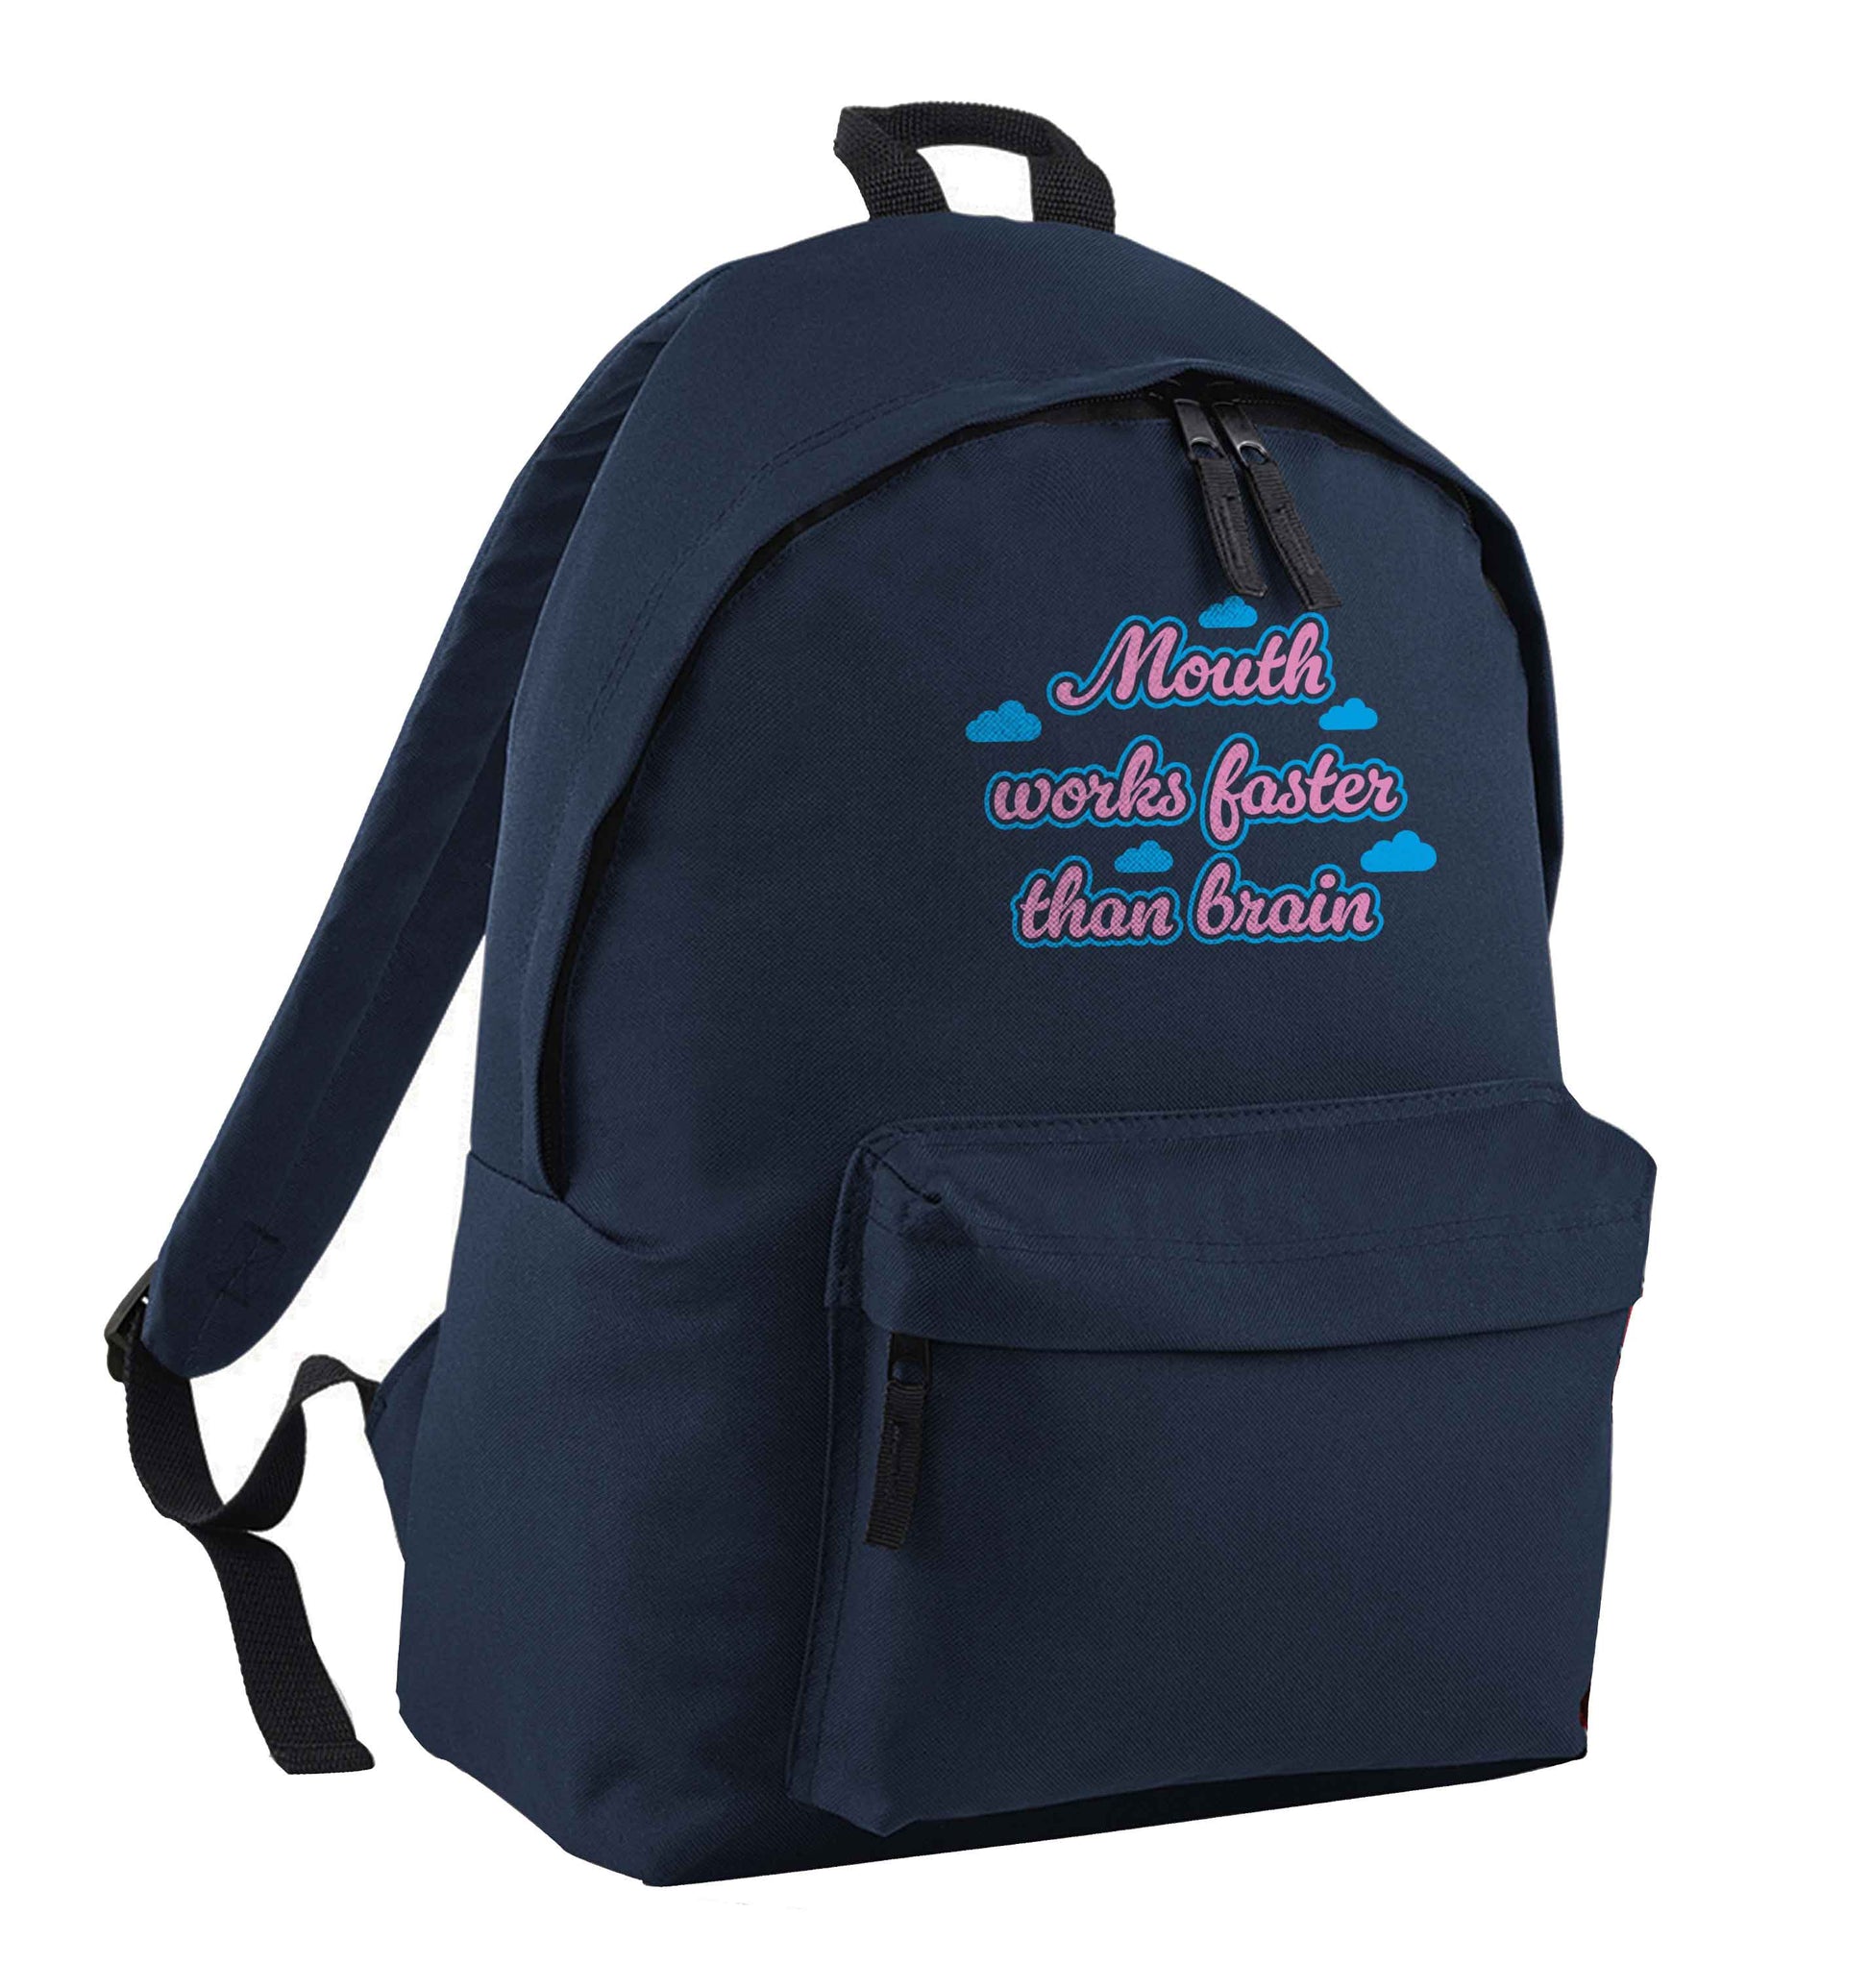 Mouth works faster than brain navy adults backpack